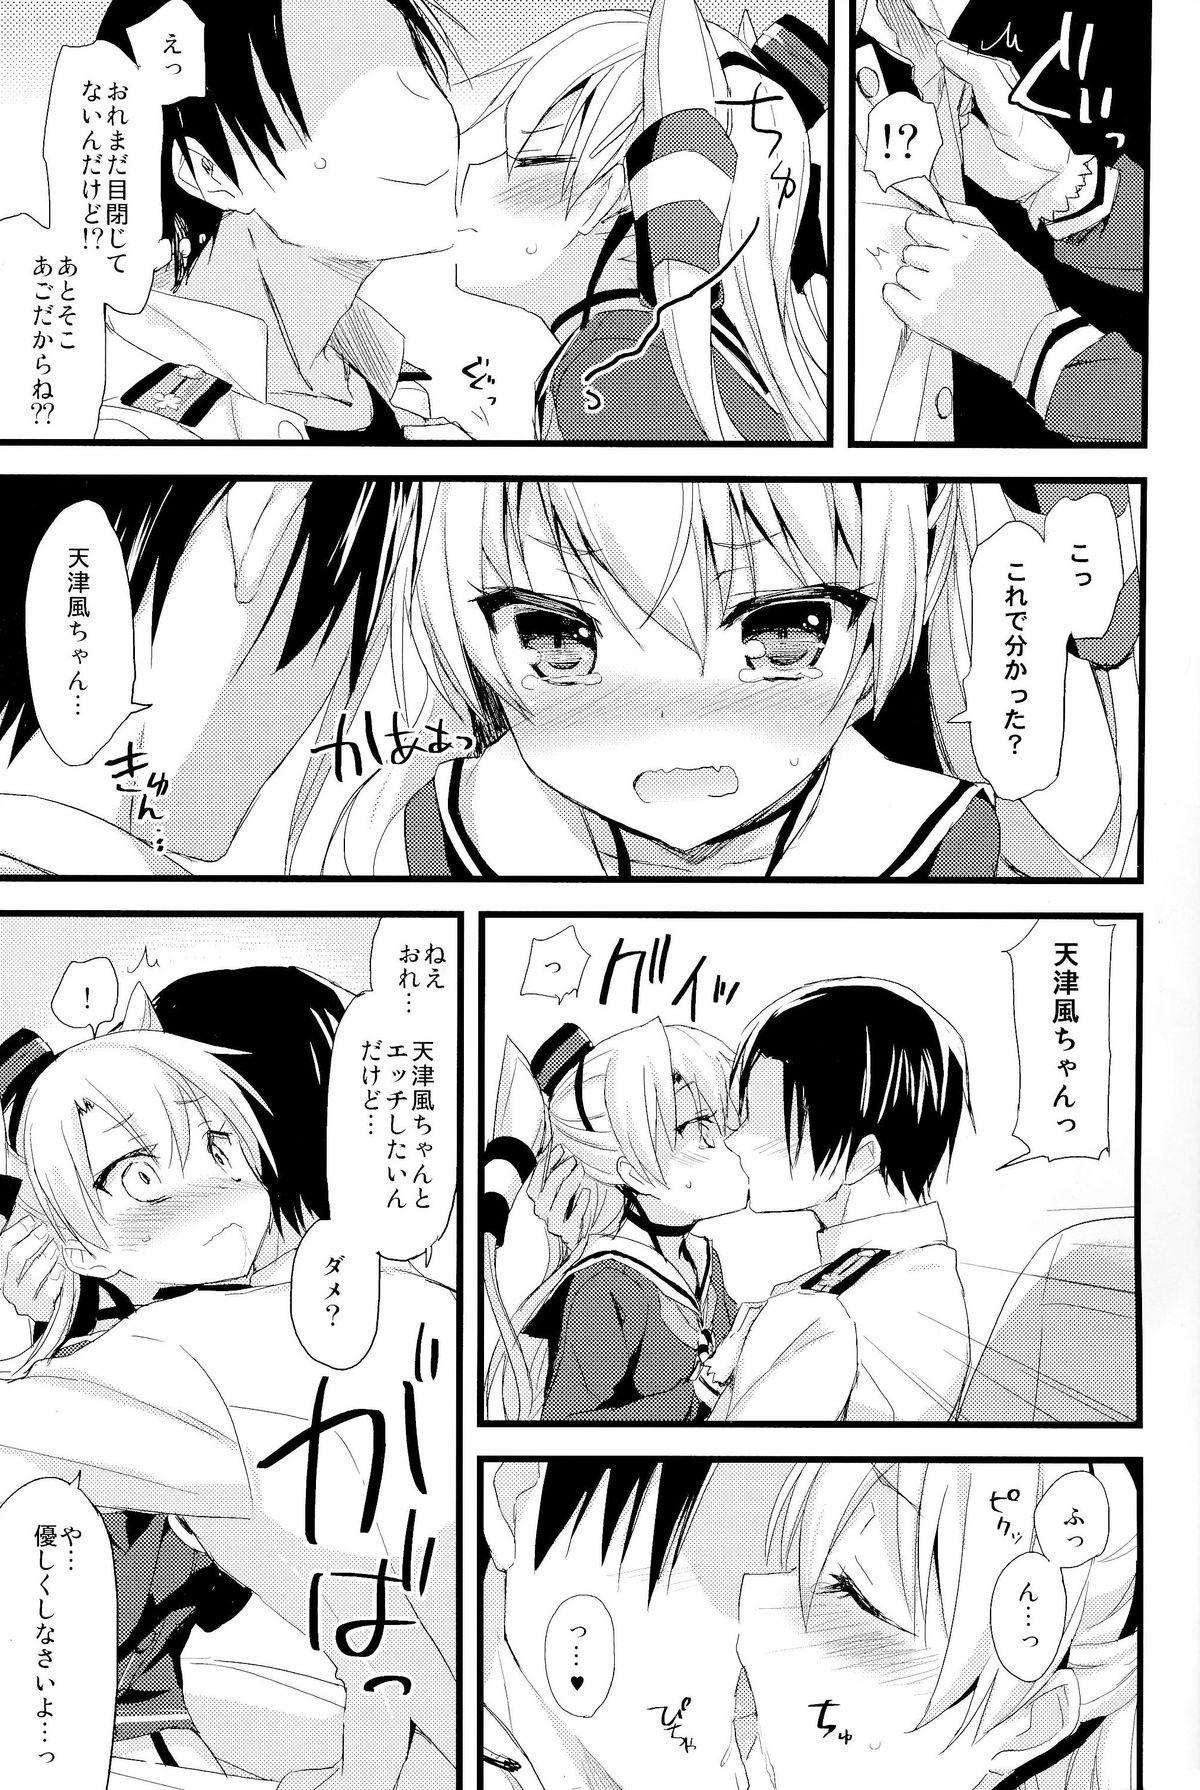 Lesbian Porn ∞Oooverheat↑ - Kantai collection Concha - Page 10